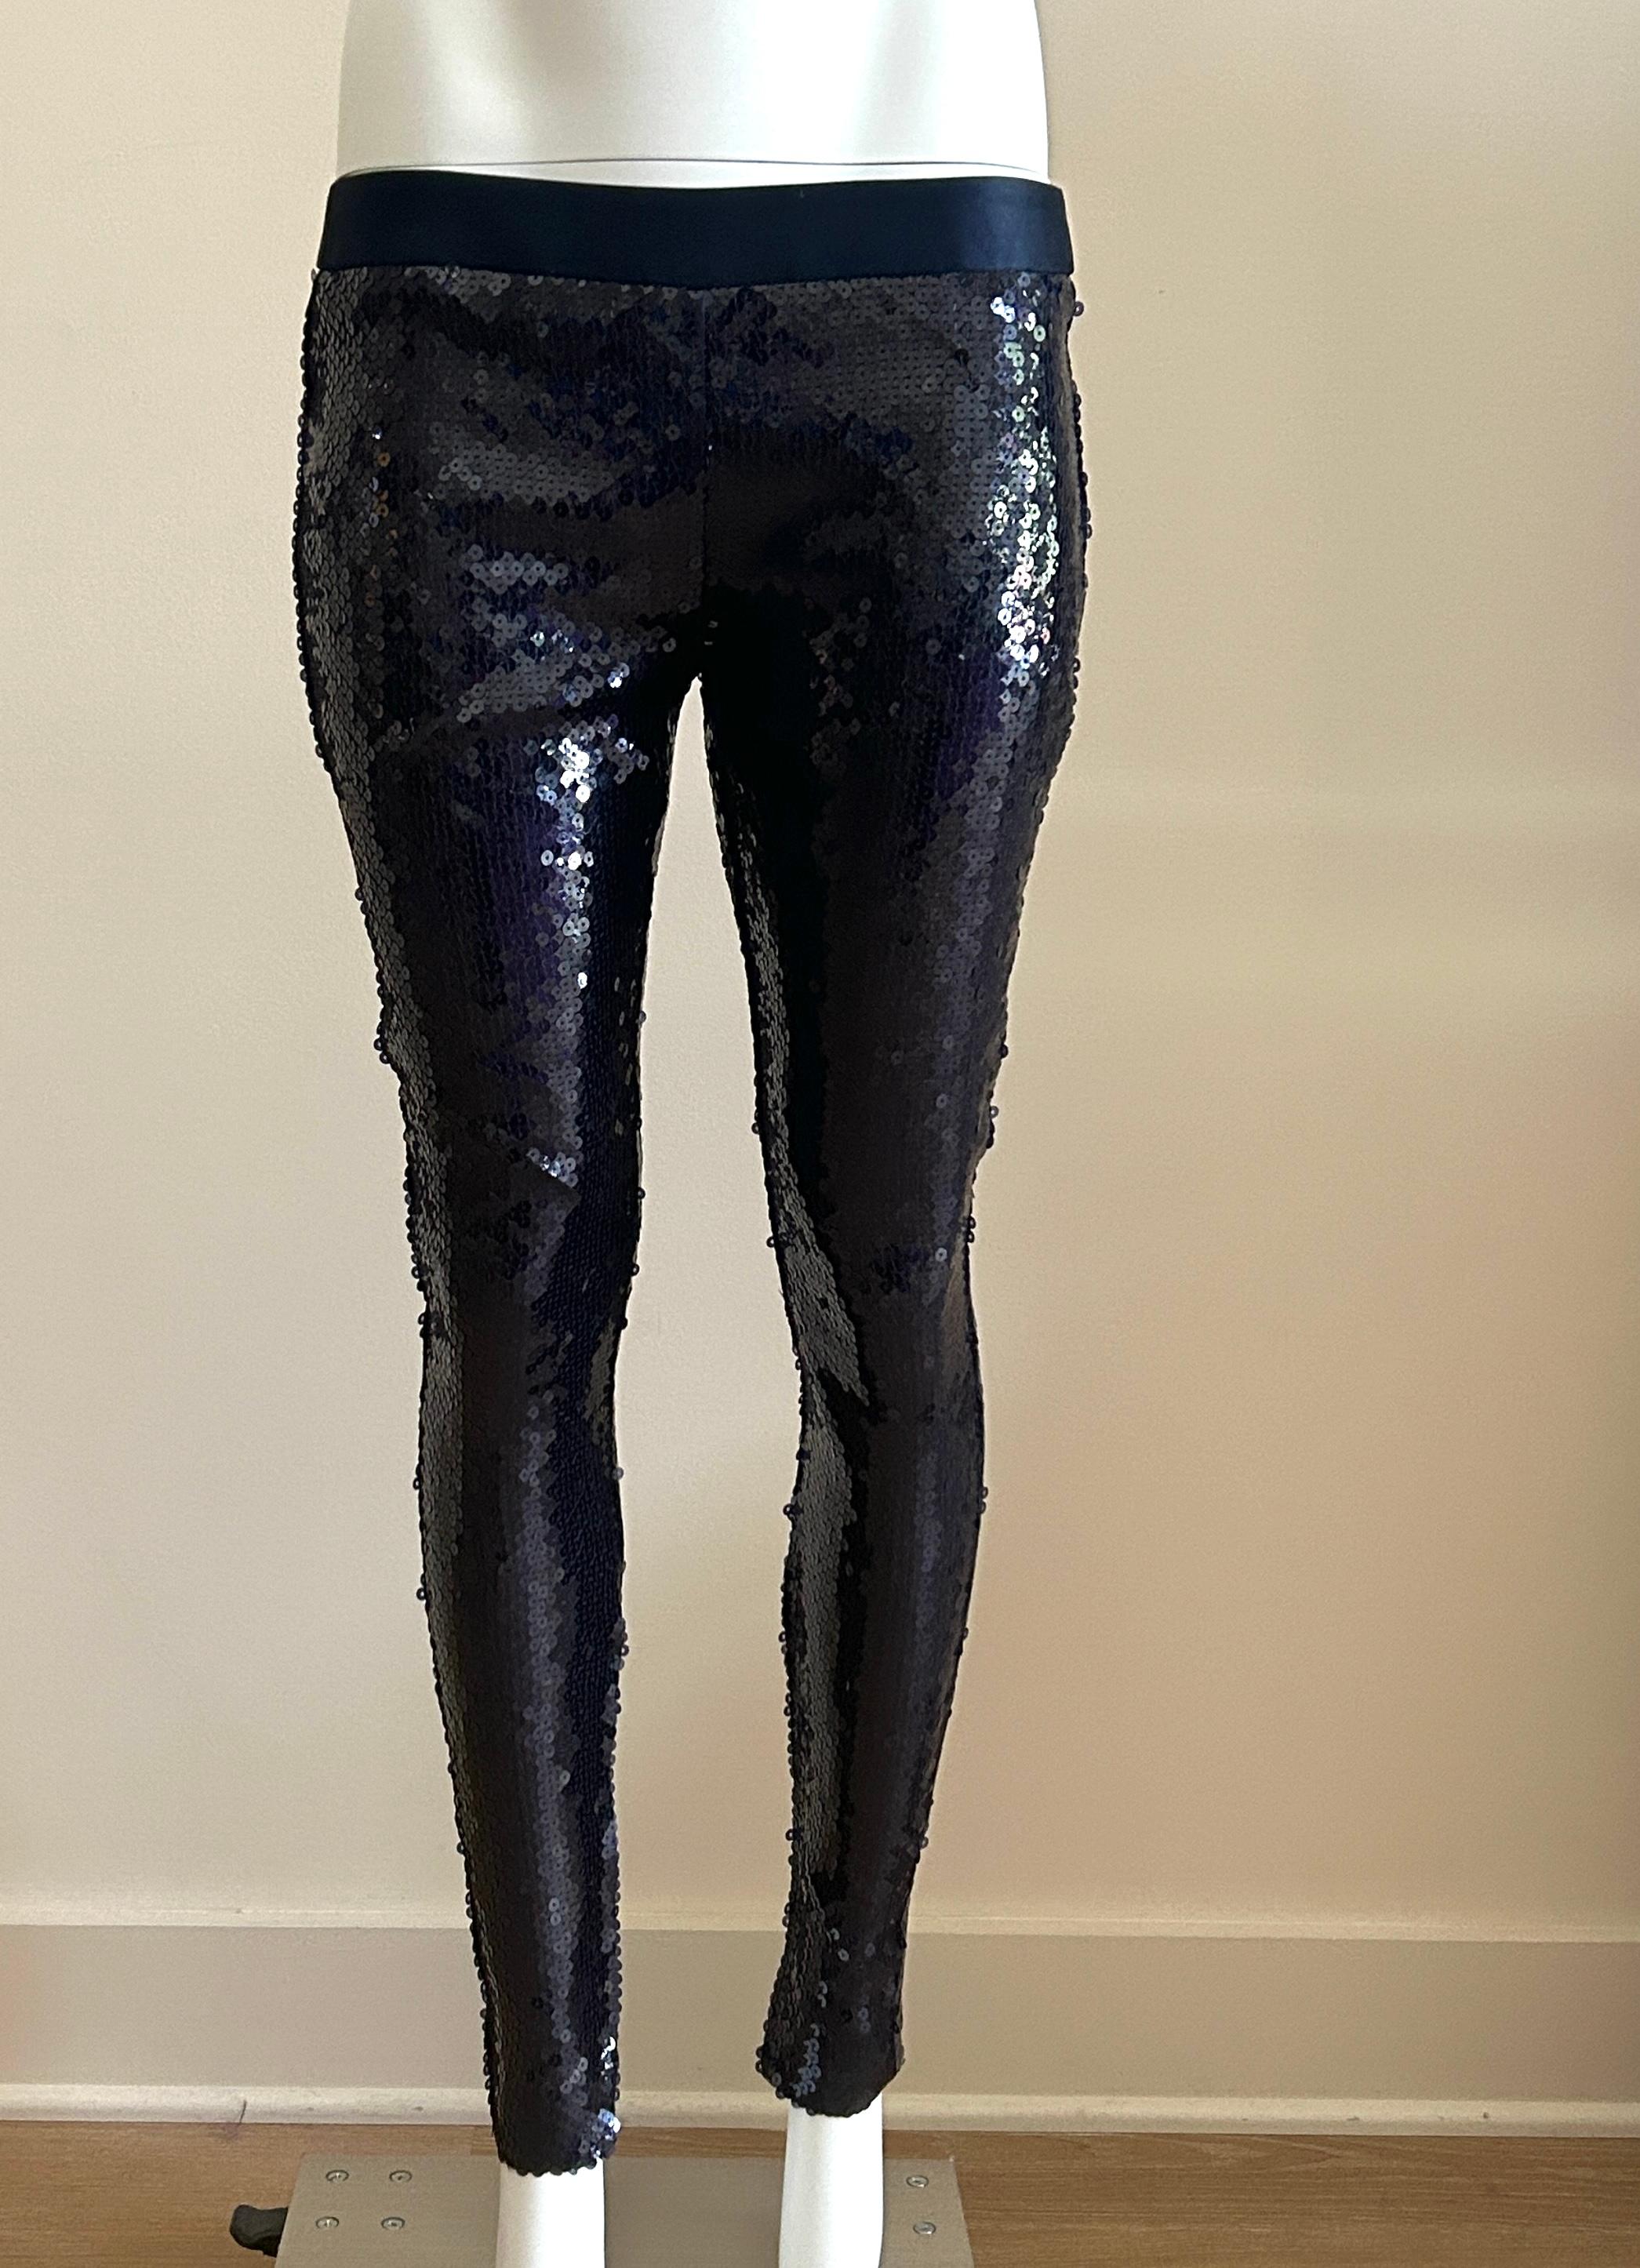 Alexander McQueen navy blue sequined leggings from the Fall/Winter 2008 collection The Girl Who Lived in a Tree. As seen in gold in runway look 25.

Pants feature all over navy blue metallic sequins with zippers at inner ankles for tailored fit.